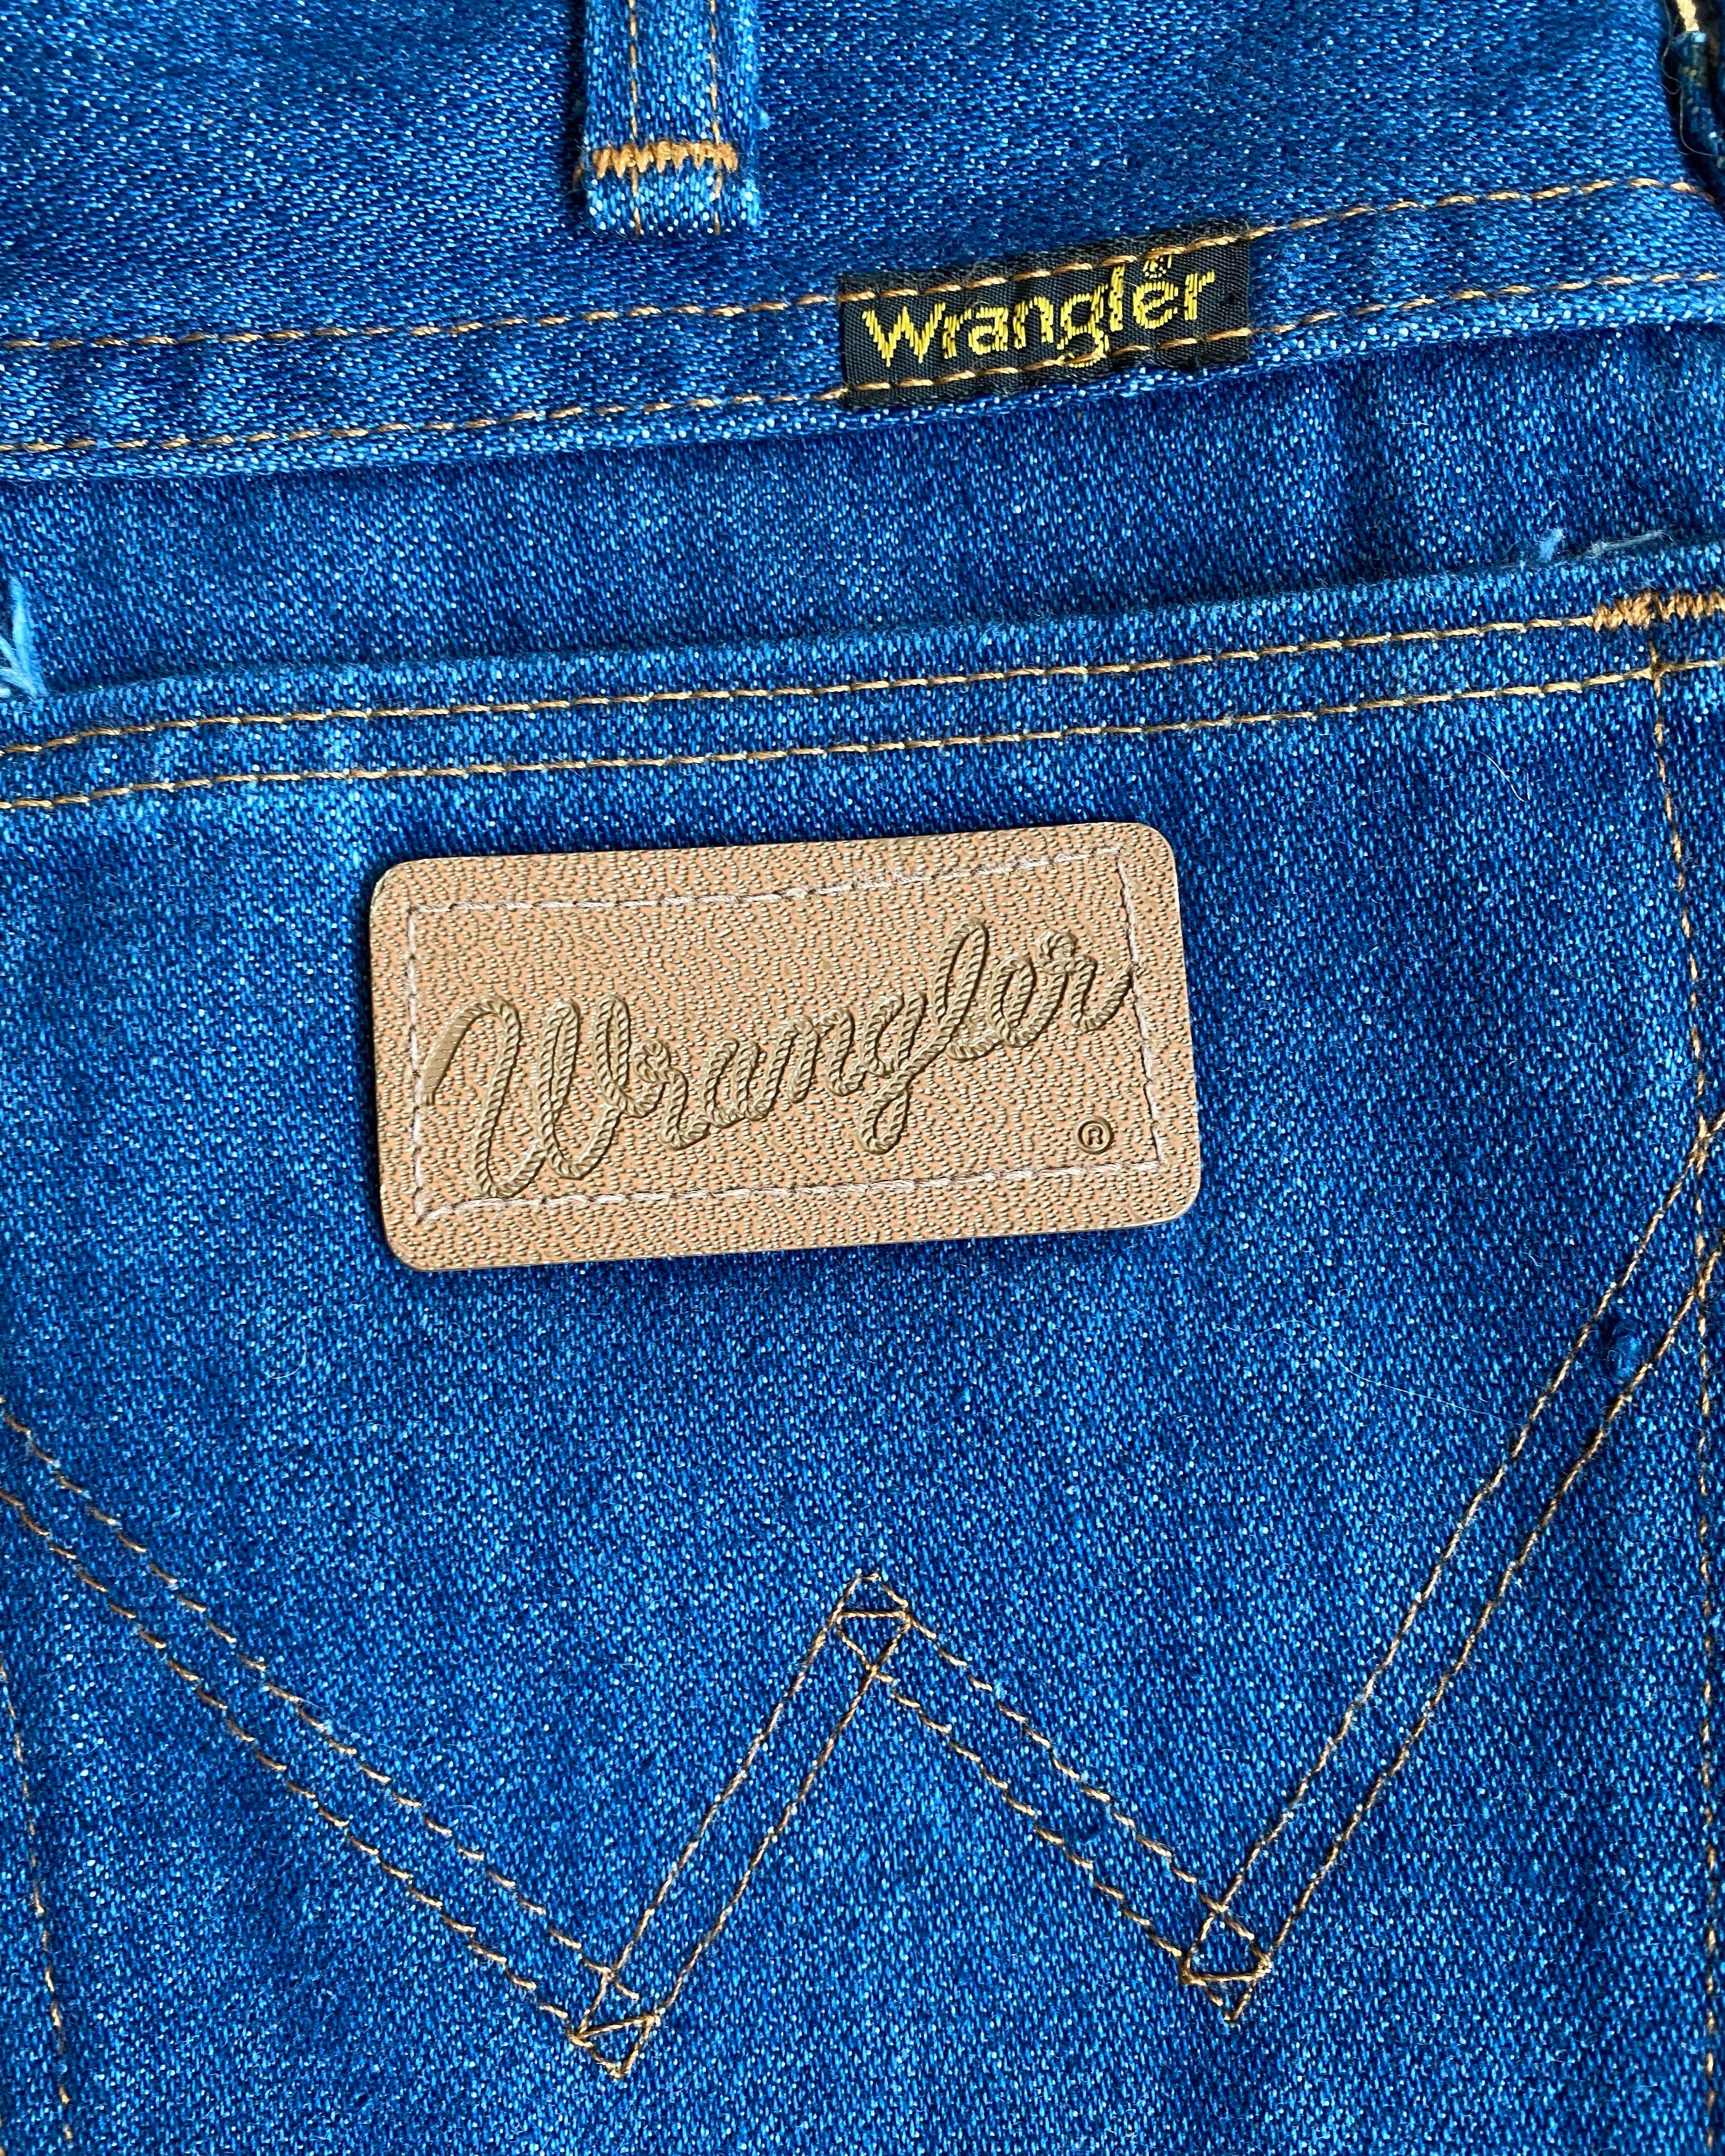 Vintage Wranglers Dark Wash Jeans Made in USA size 26 to 27